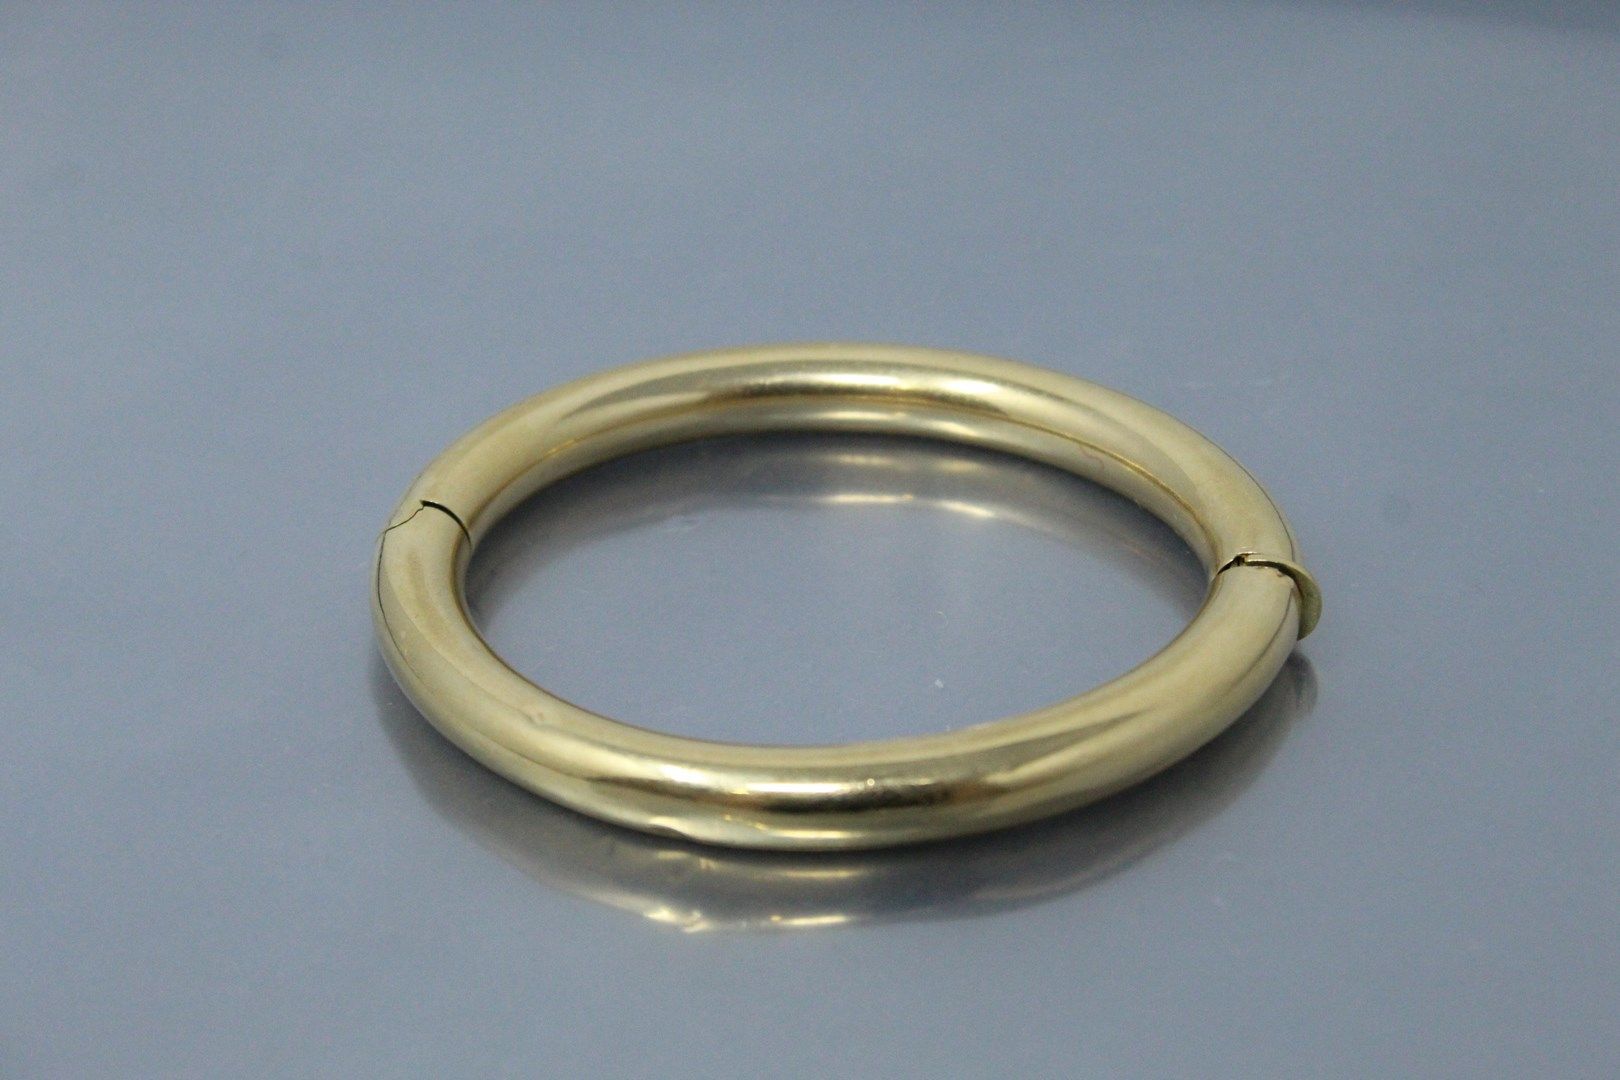 Null 18k (750) yellow gold bangle.

Gross weight: 25.96 g. 

(Pressings)